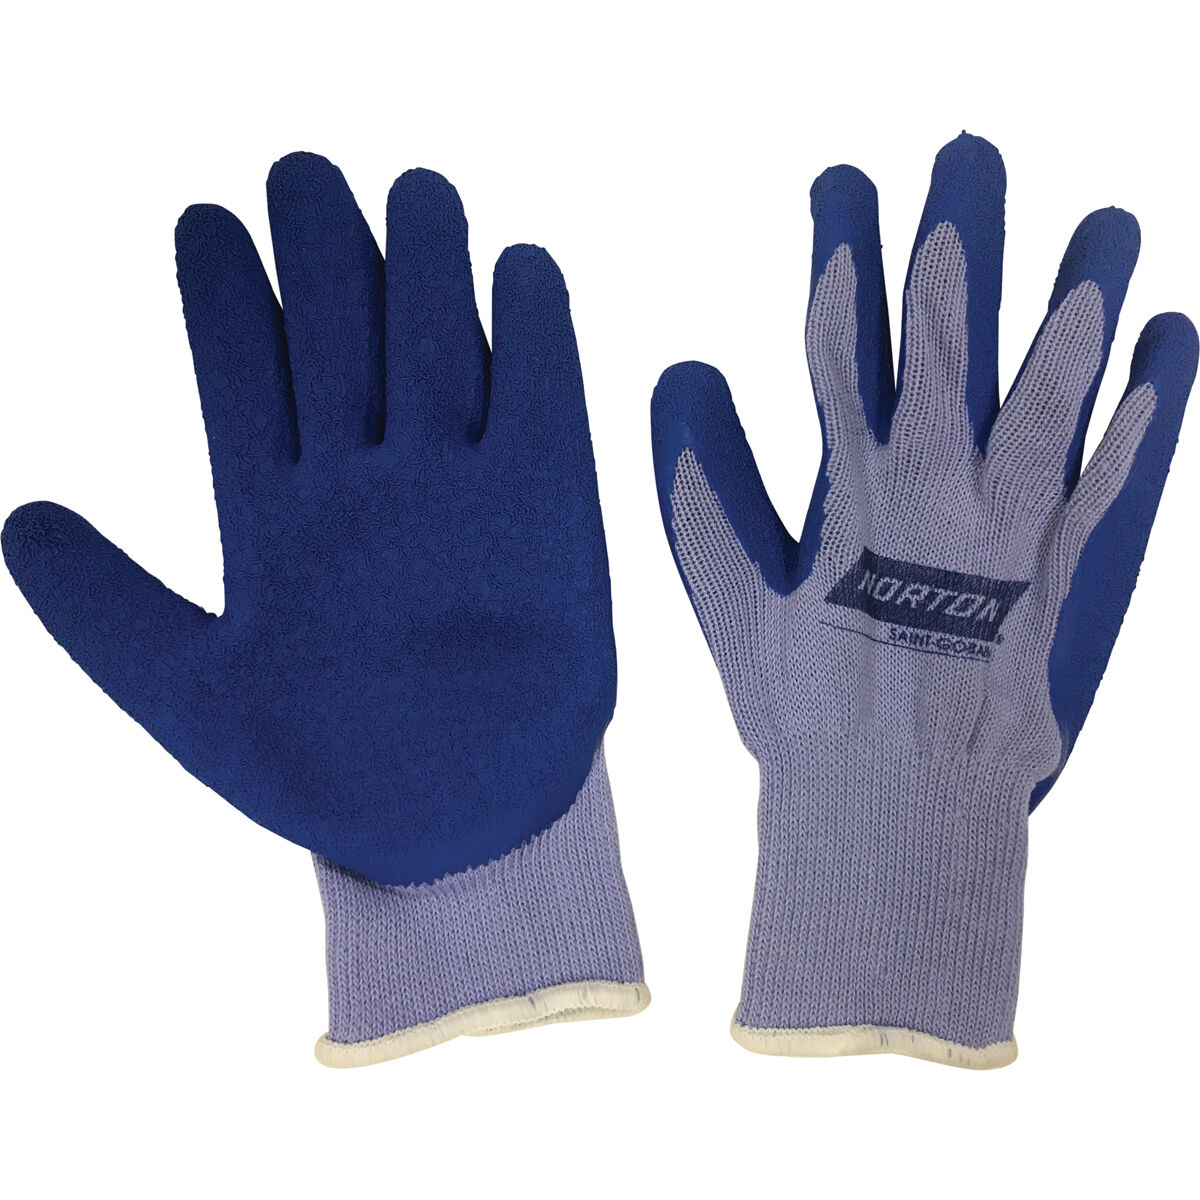 Norton Poly Cotton Glove with Natural Rubber - Pair, , scaau_hi-res